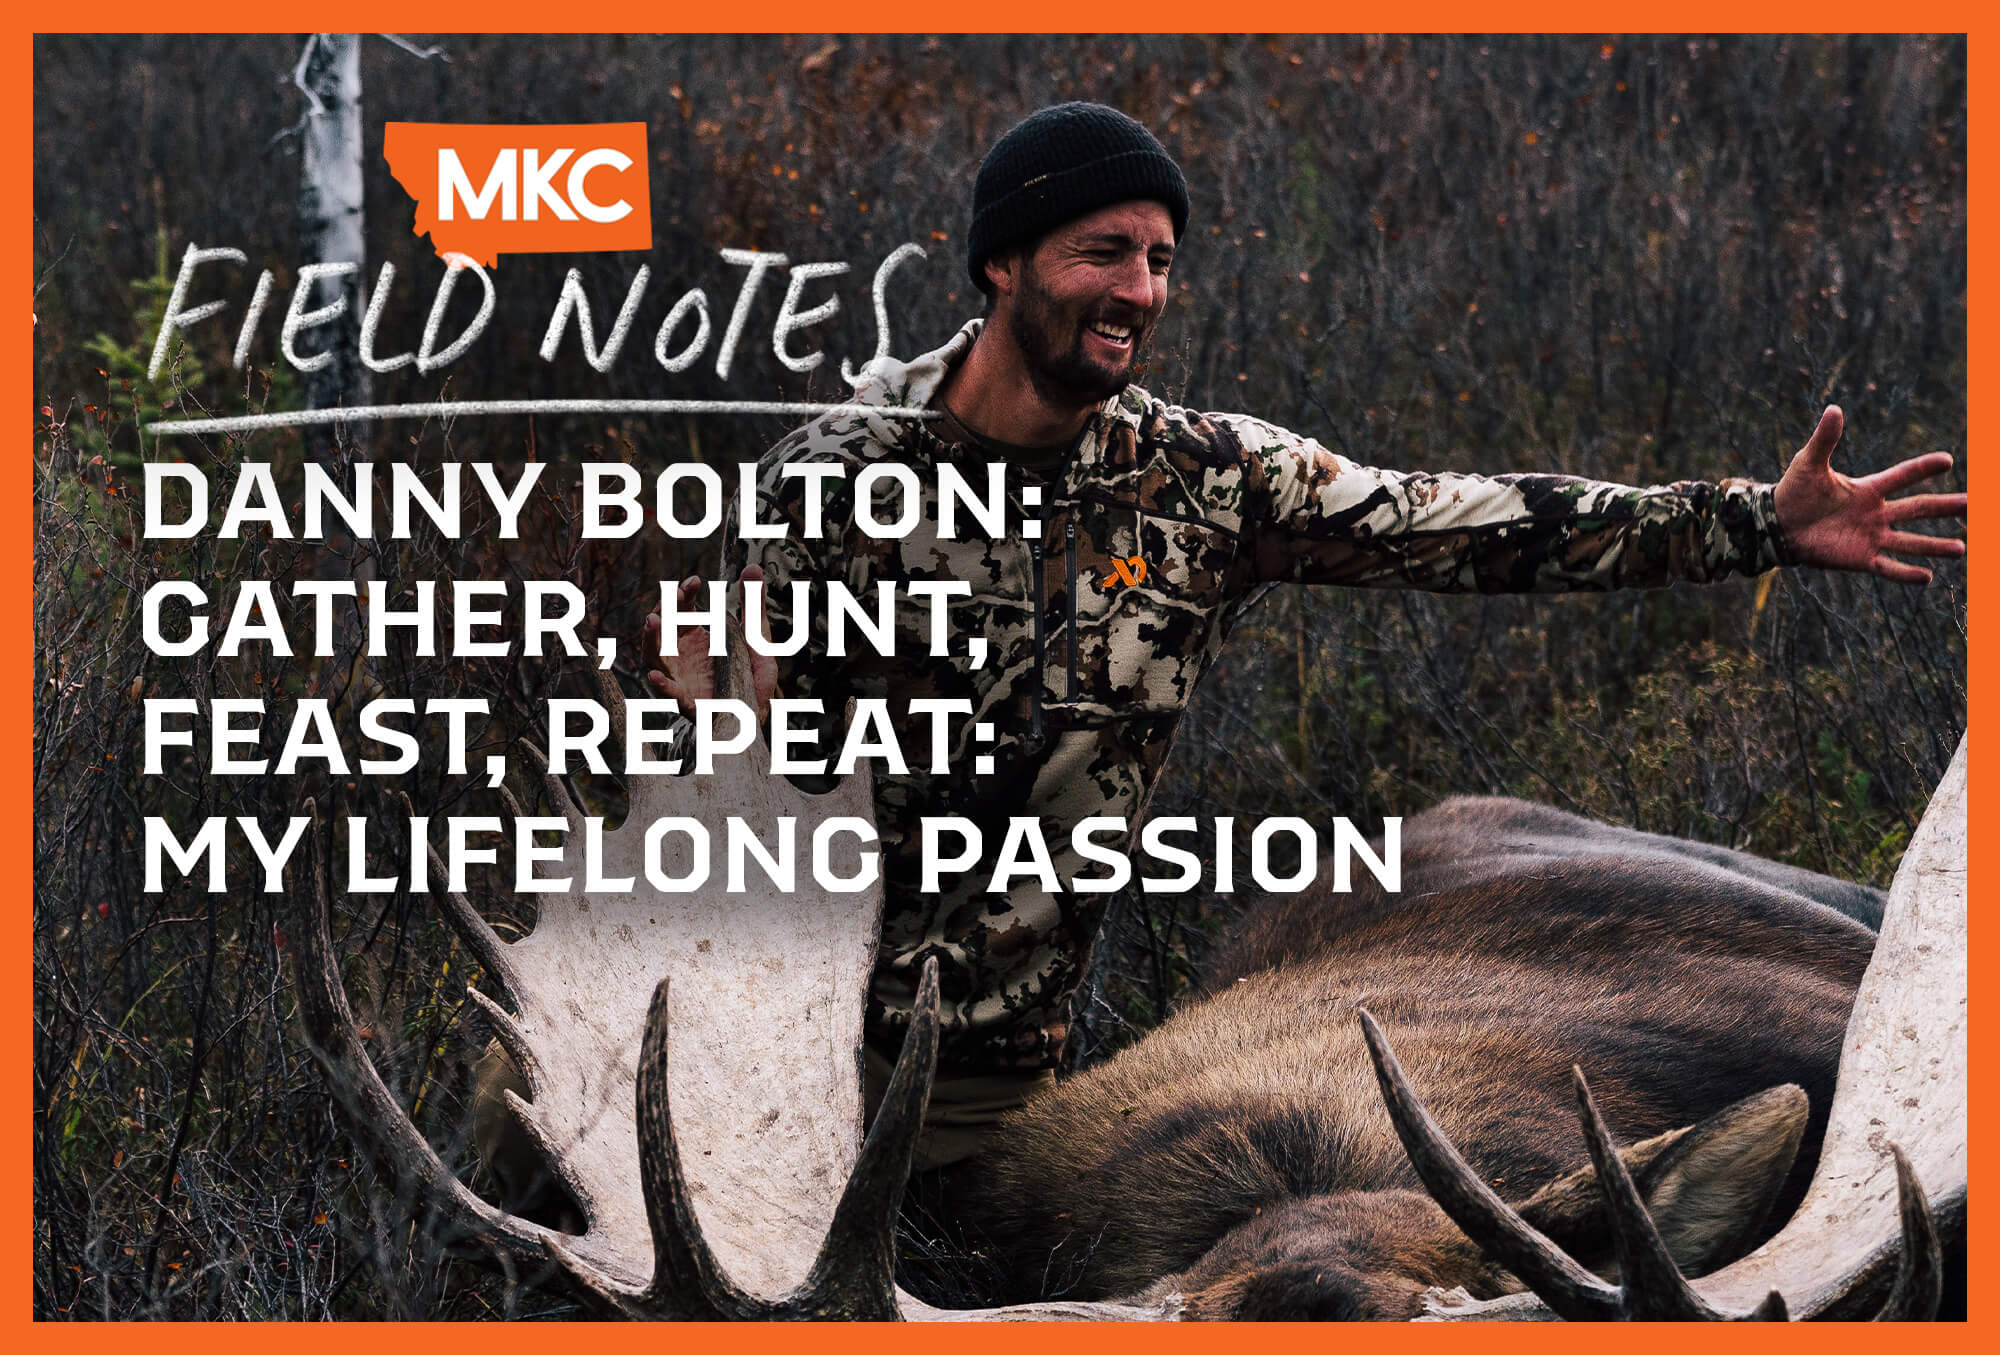 Wearing camo, Danny Bolton smiles and gestures over a downed moose in the field, representing a passion for sharing his hunt.